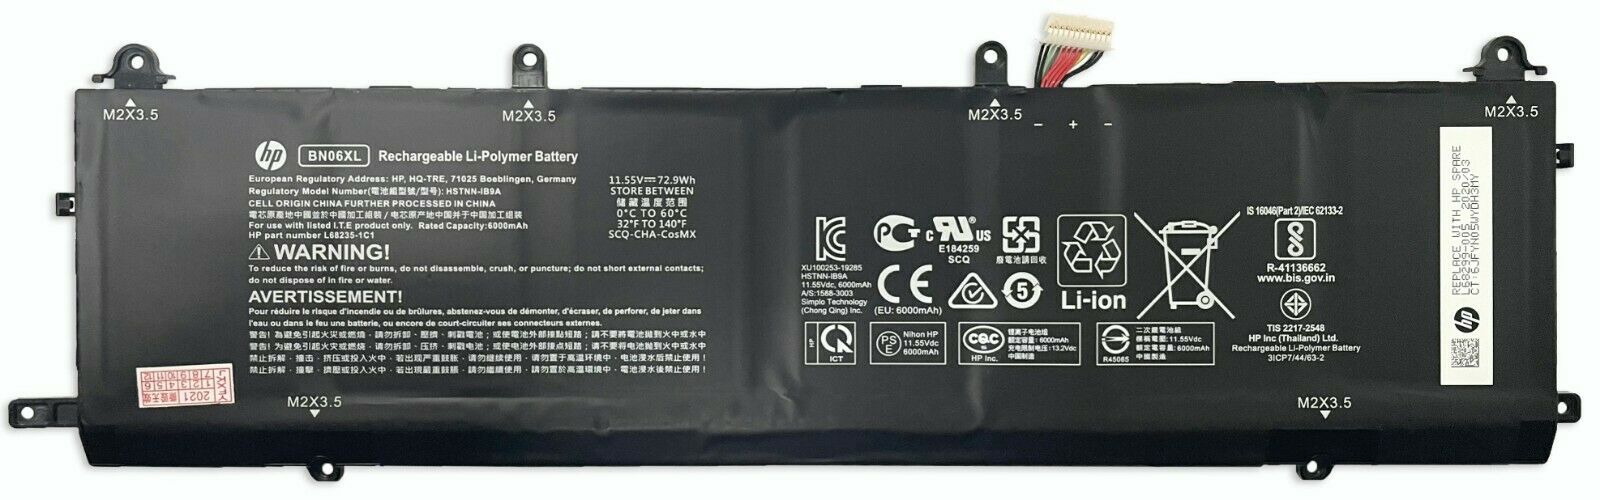 HP Spectre x360 15-eb1829nz Battery 6-cell 72.9Wh